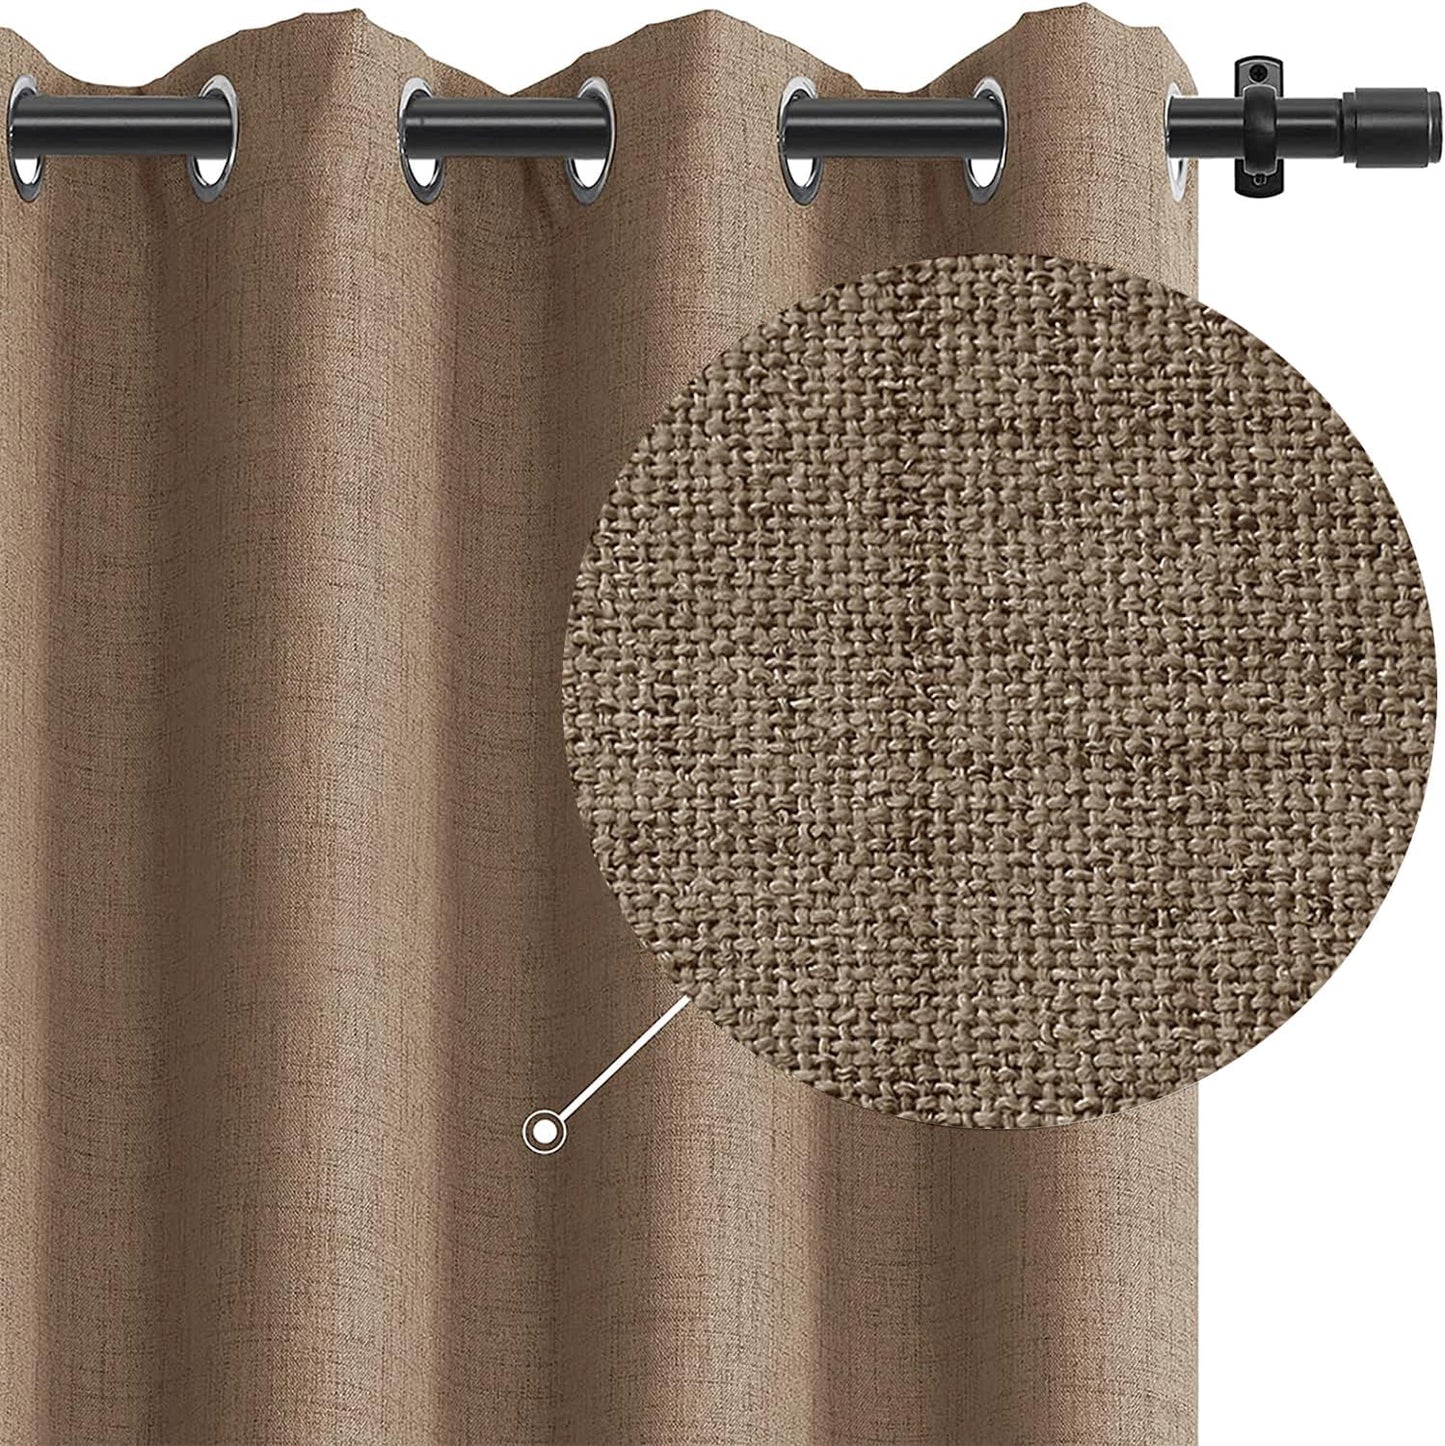 Rose Home Fashion Linen Blackout Curtains 84 Inch Length 2 Panels Set, 100% Black Out Curtains for Bedroom Windows 84 with Blackout Liner, Living Room Curtains & Drapes - (50X84 Beige)  Rose Home Fashion Chocolate W50 X L108 